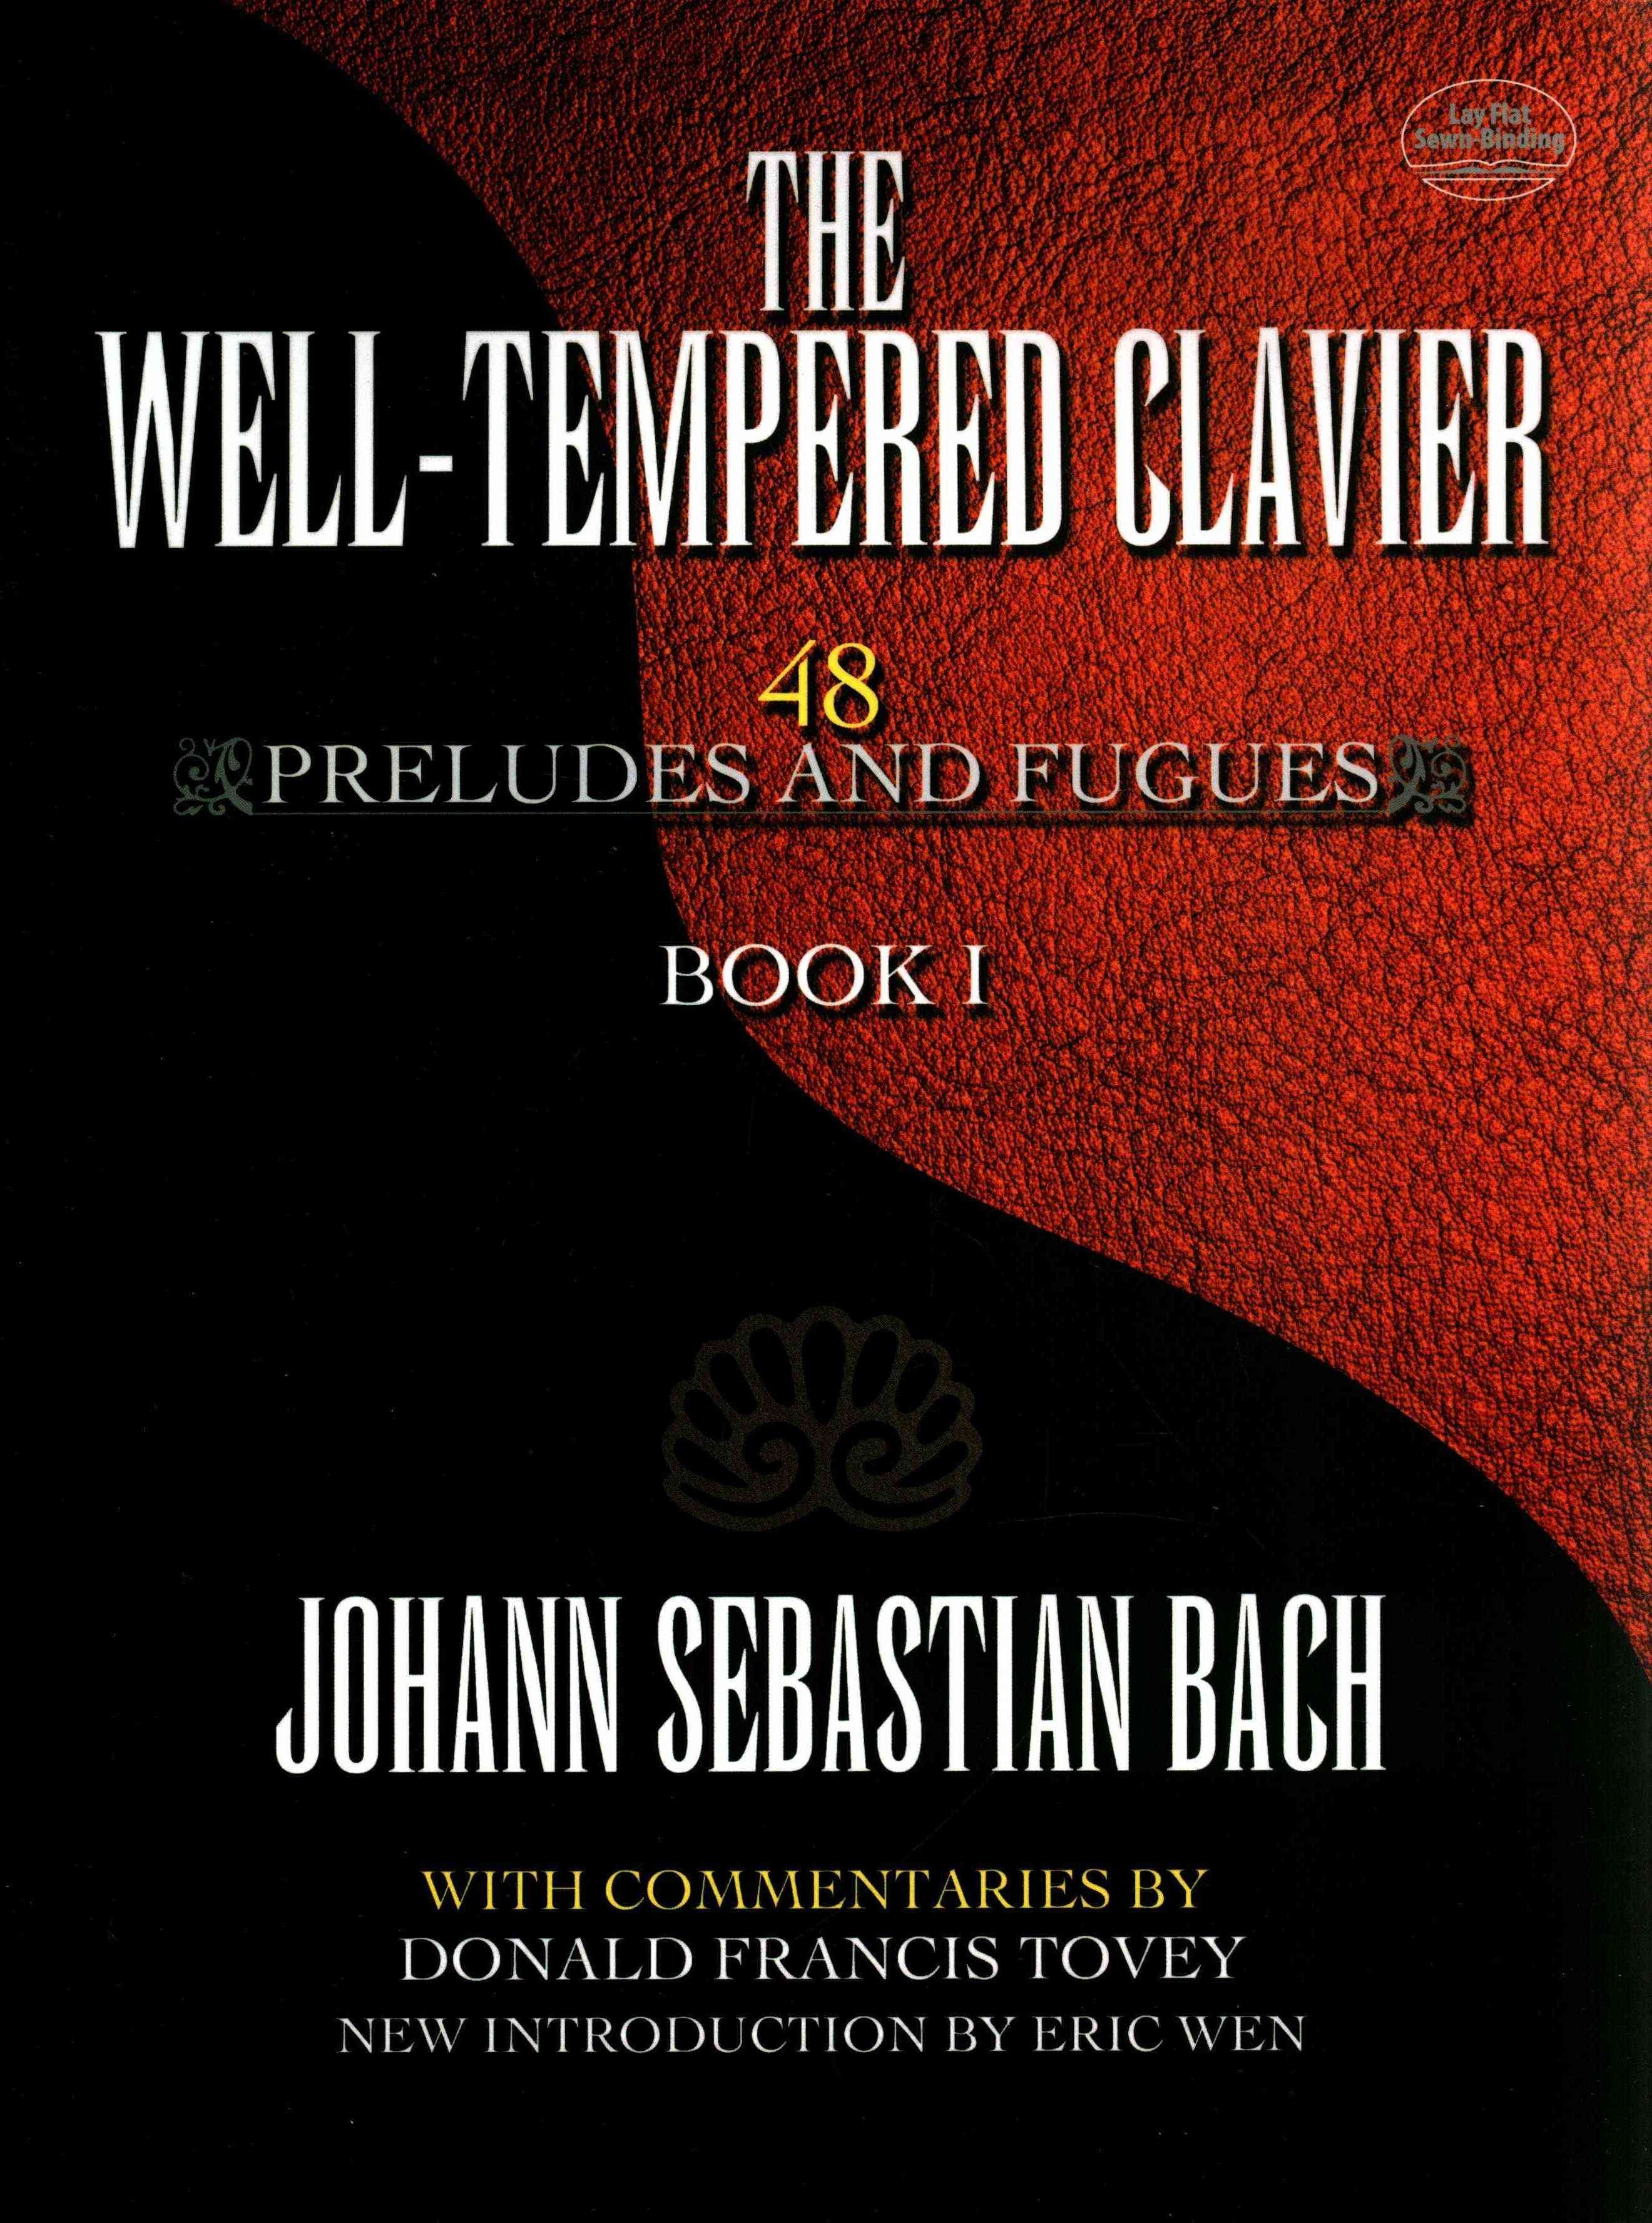 The Well-Tempered Clavier - 48 Preludes And Fugues